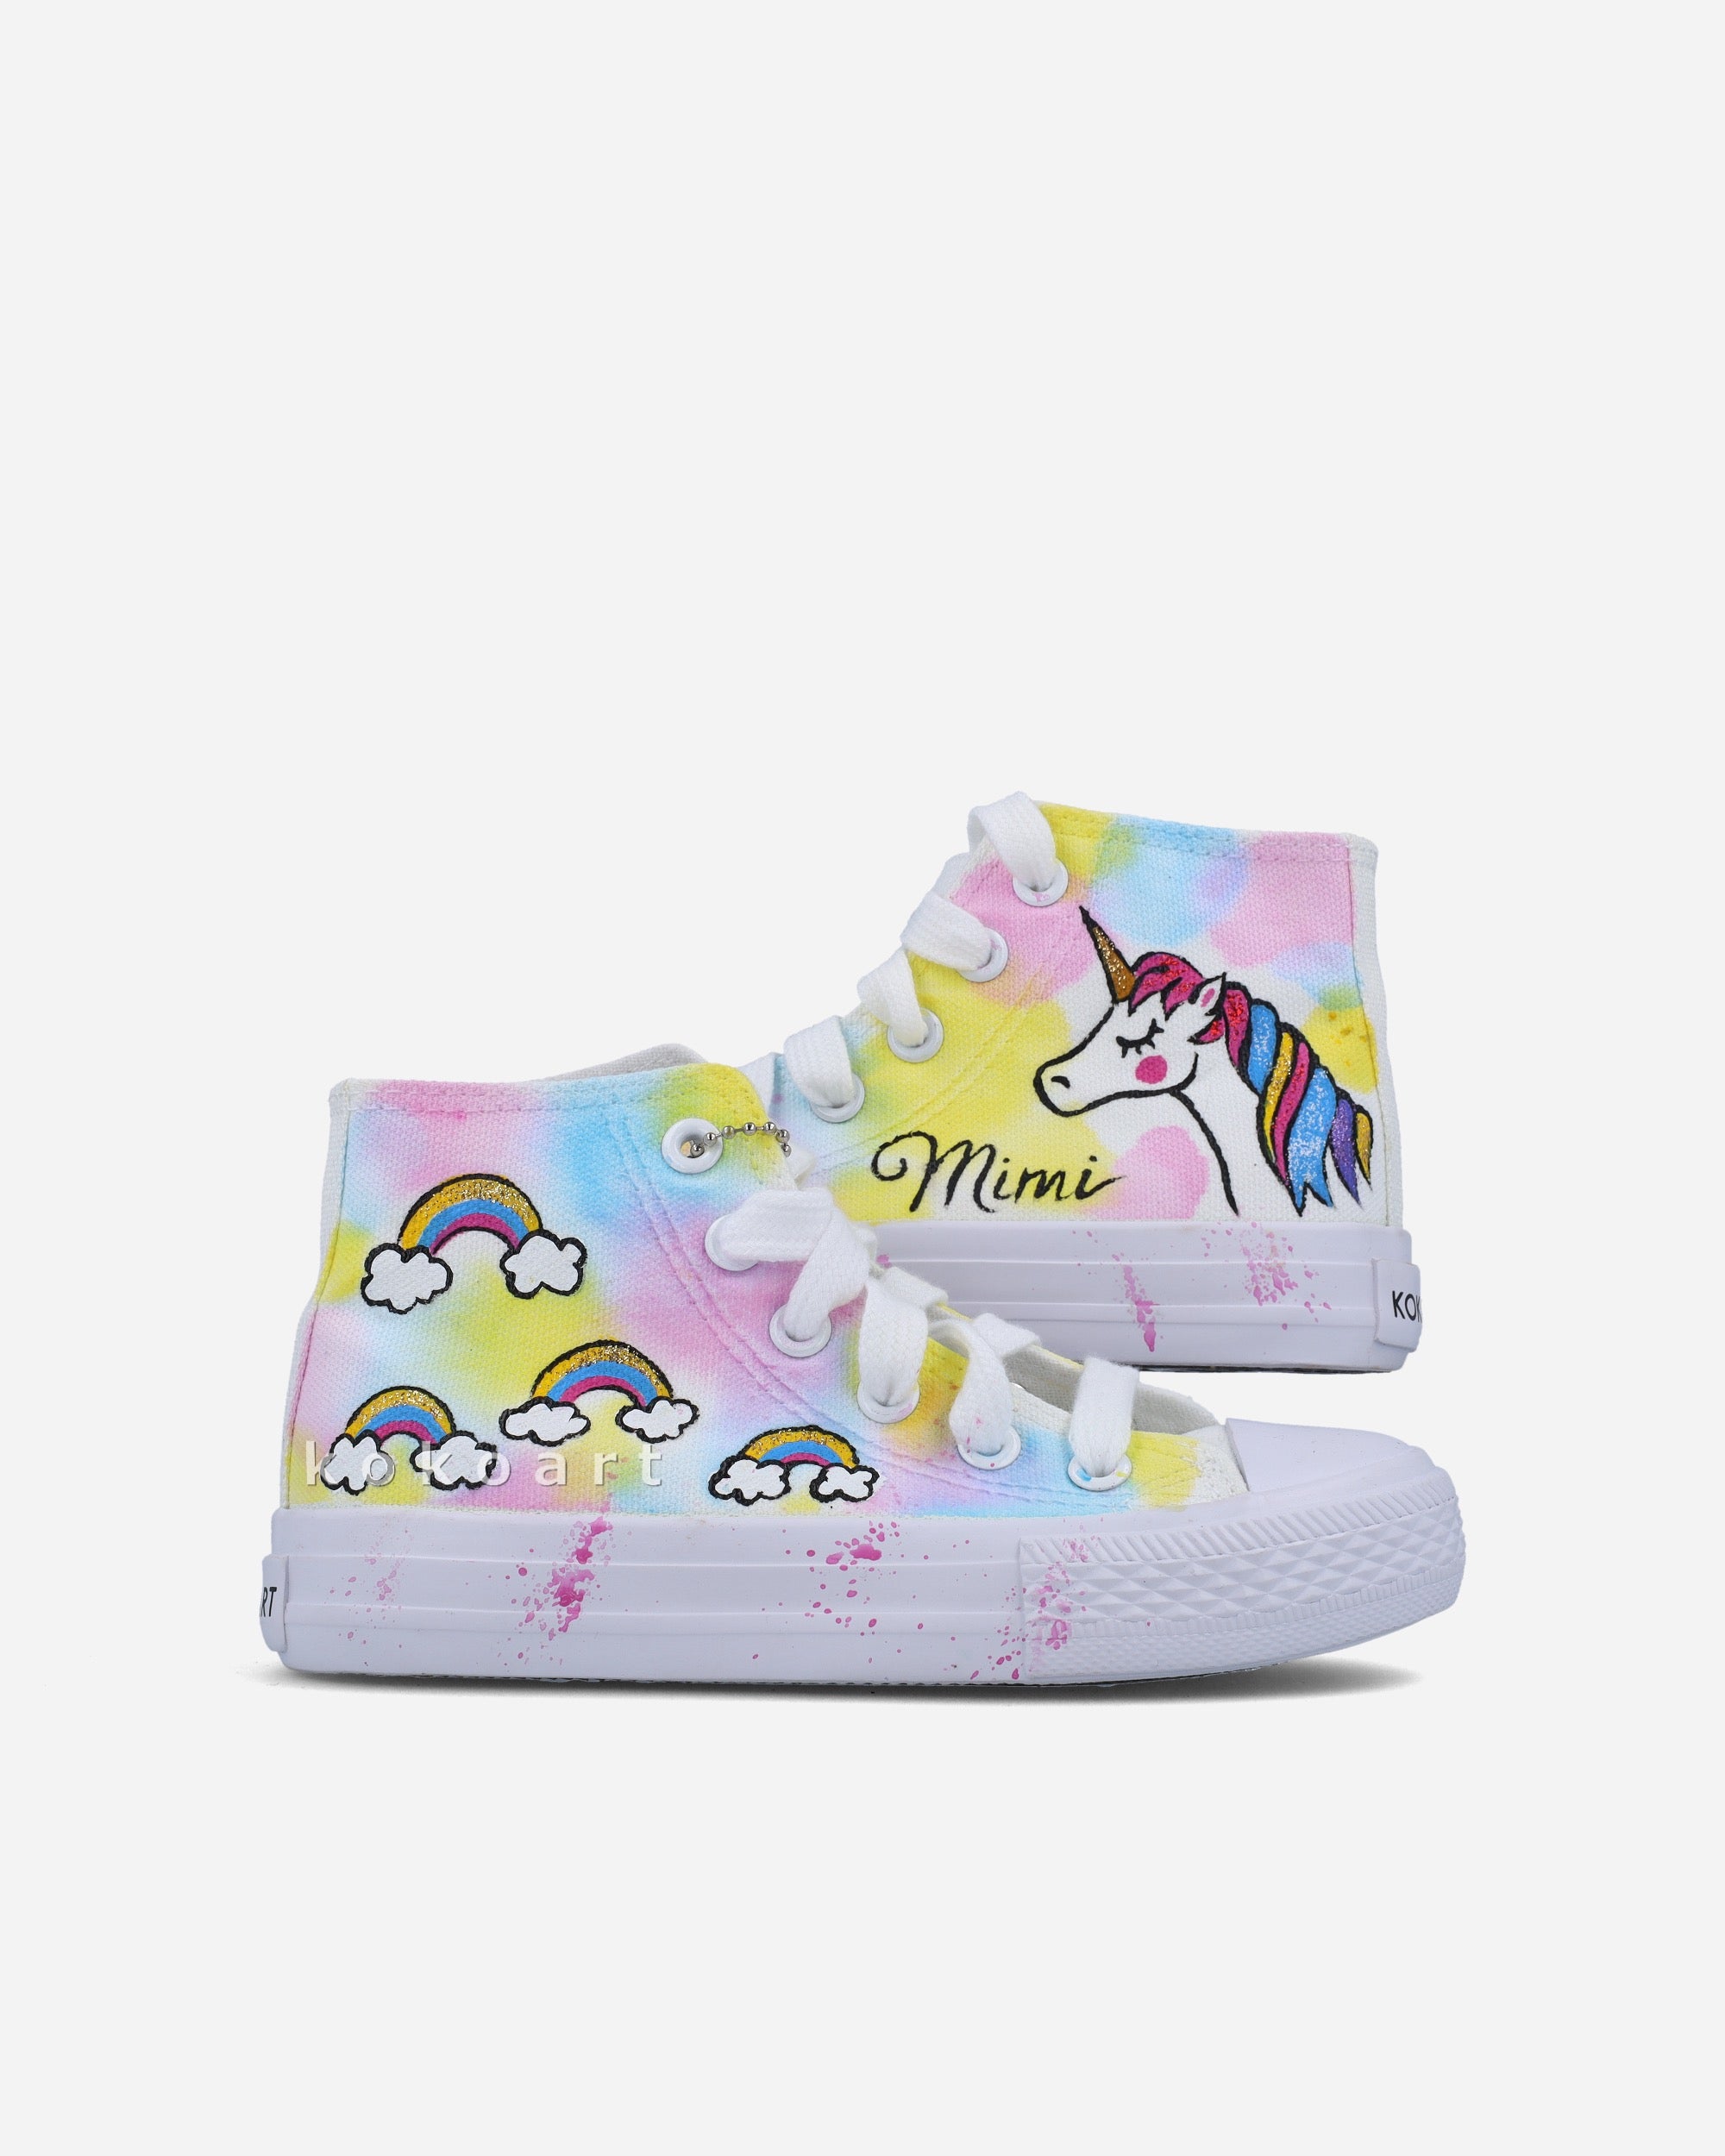 Unicorn and Rainbows Hand Painted Shoes